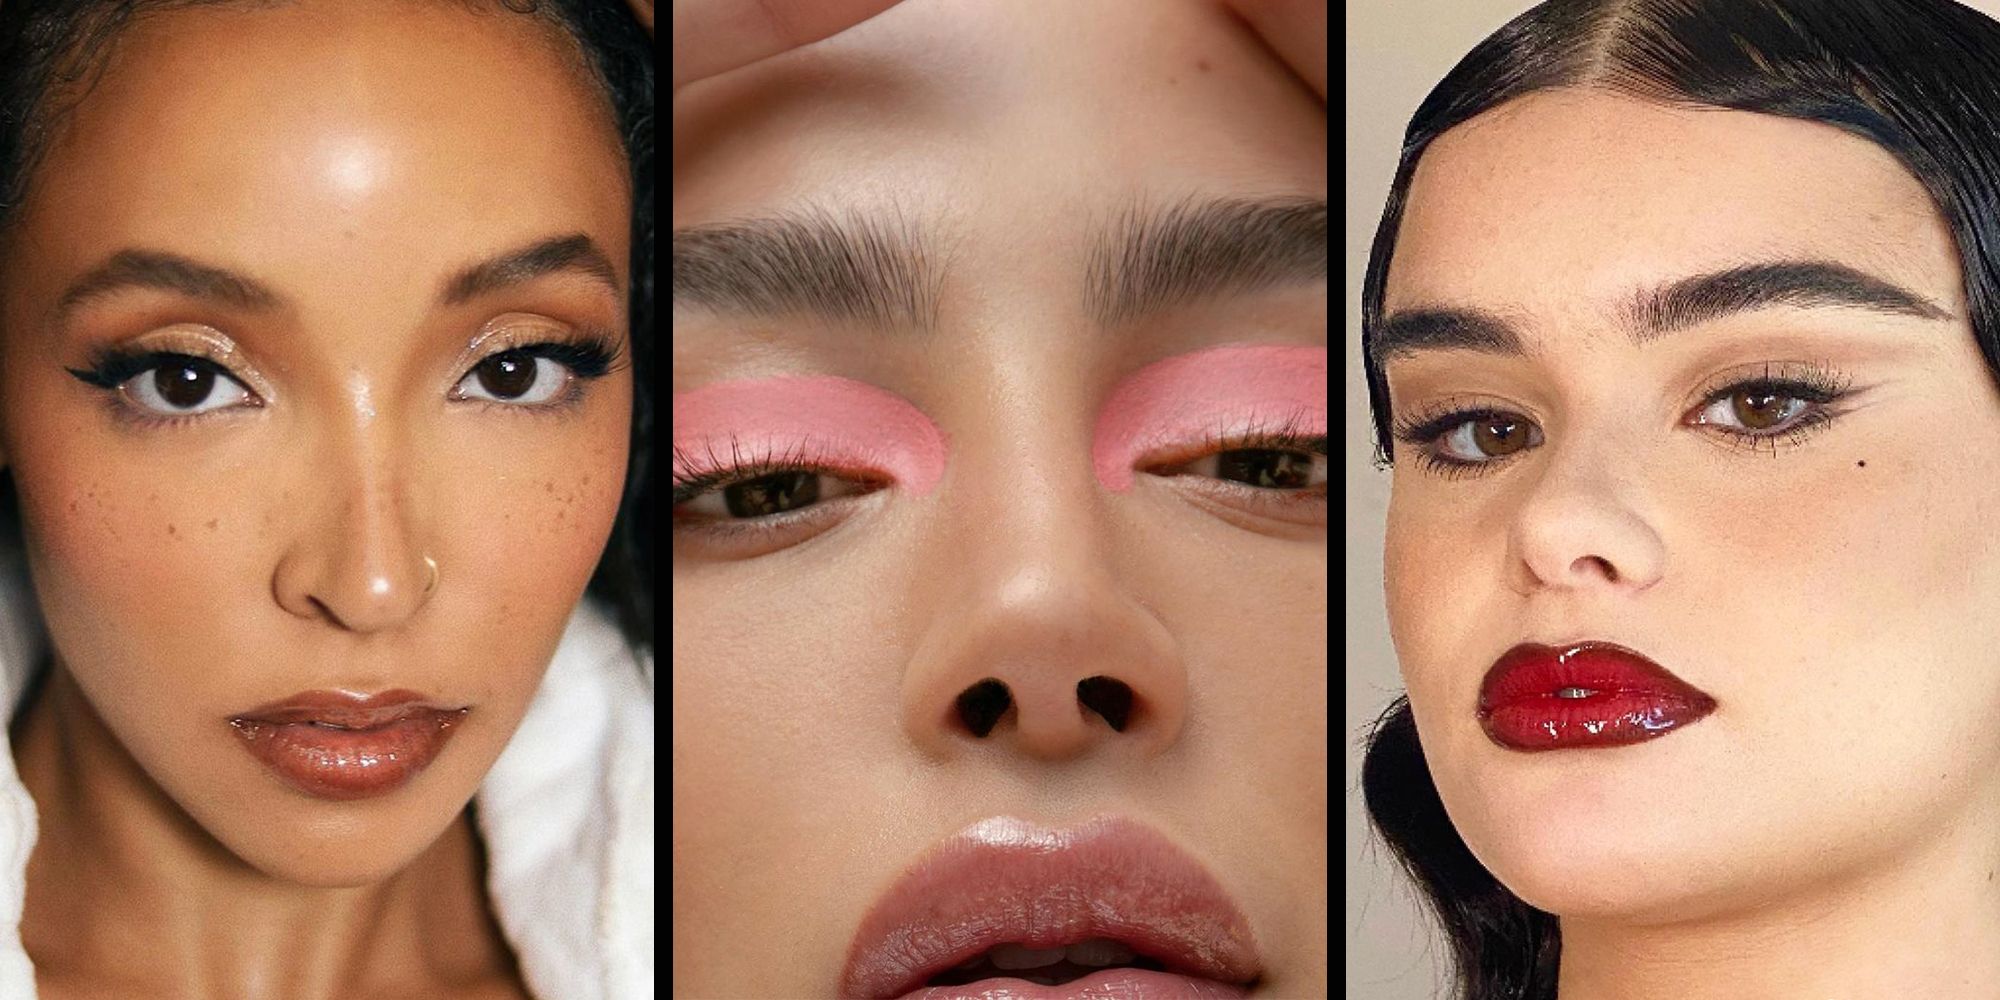 Make-up trends for 2021